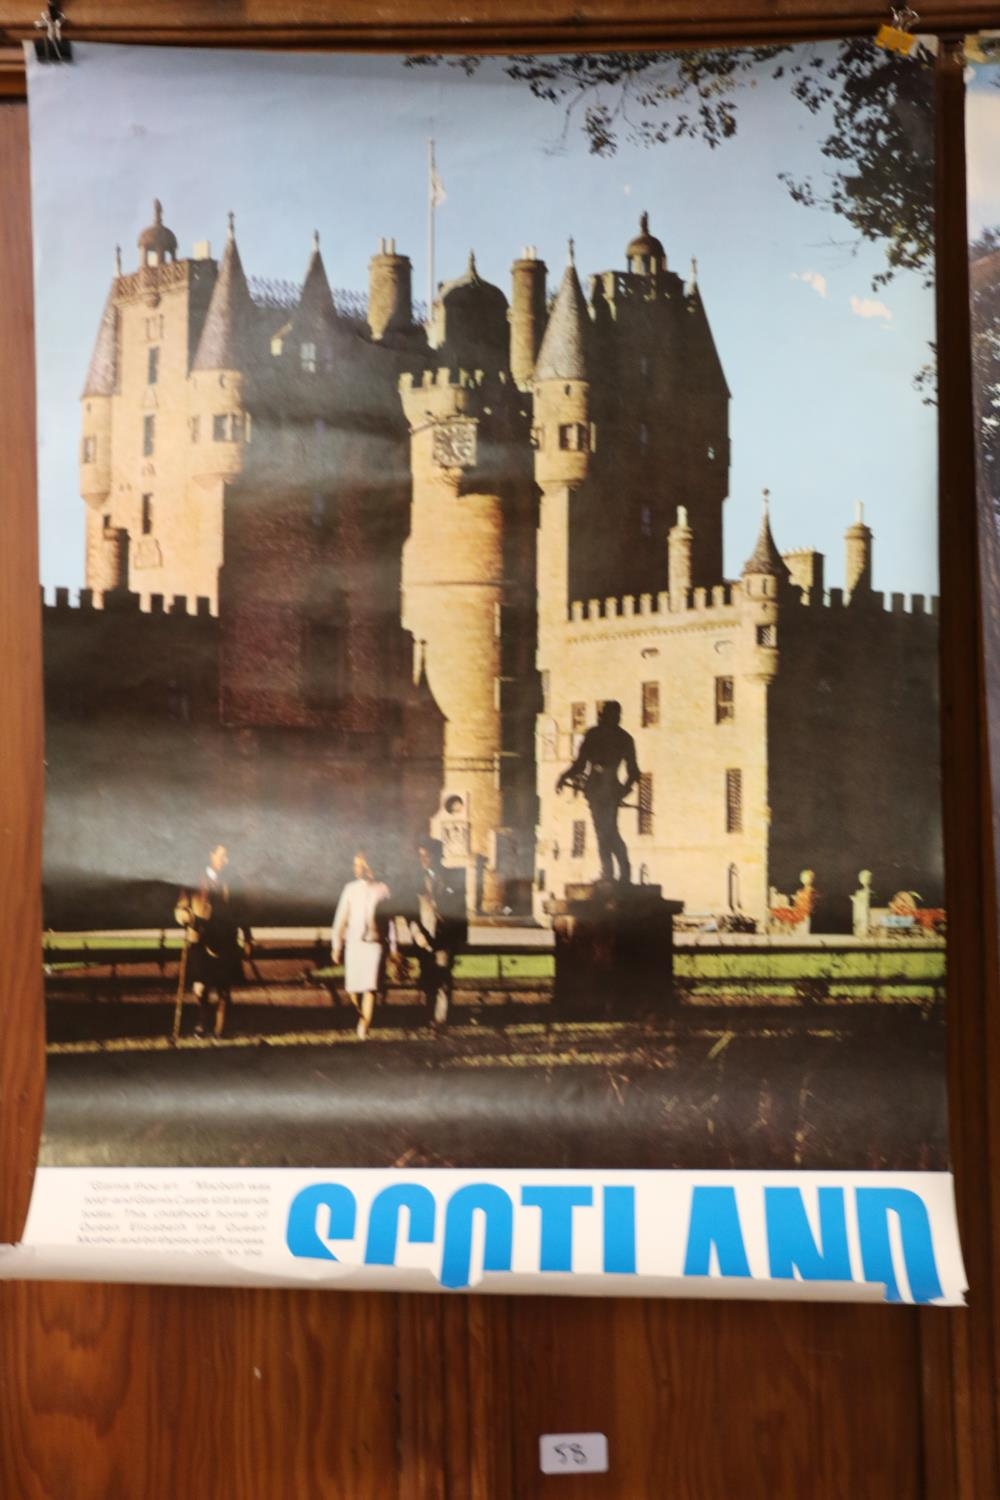 Vintage travel poster 'Scotland Glamis', published by British Travel Association, printed by